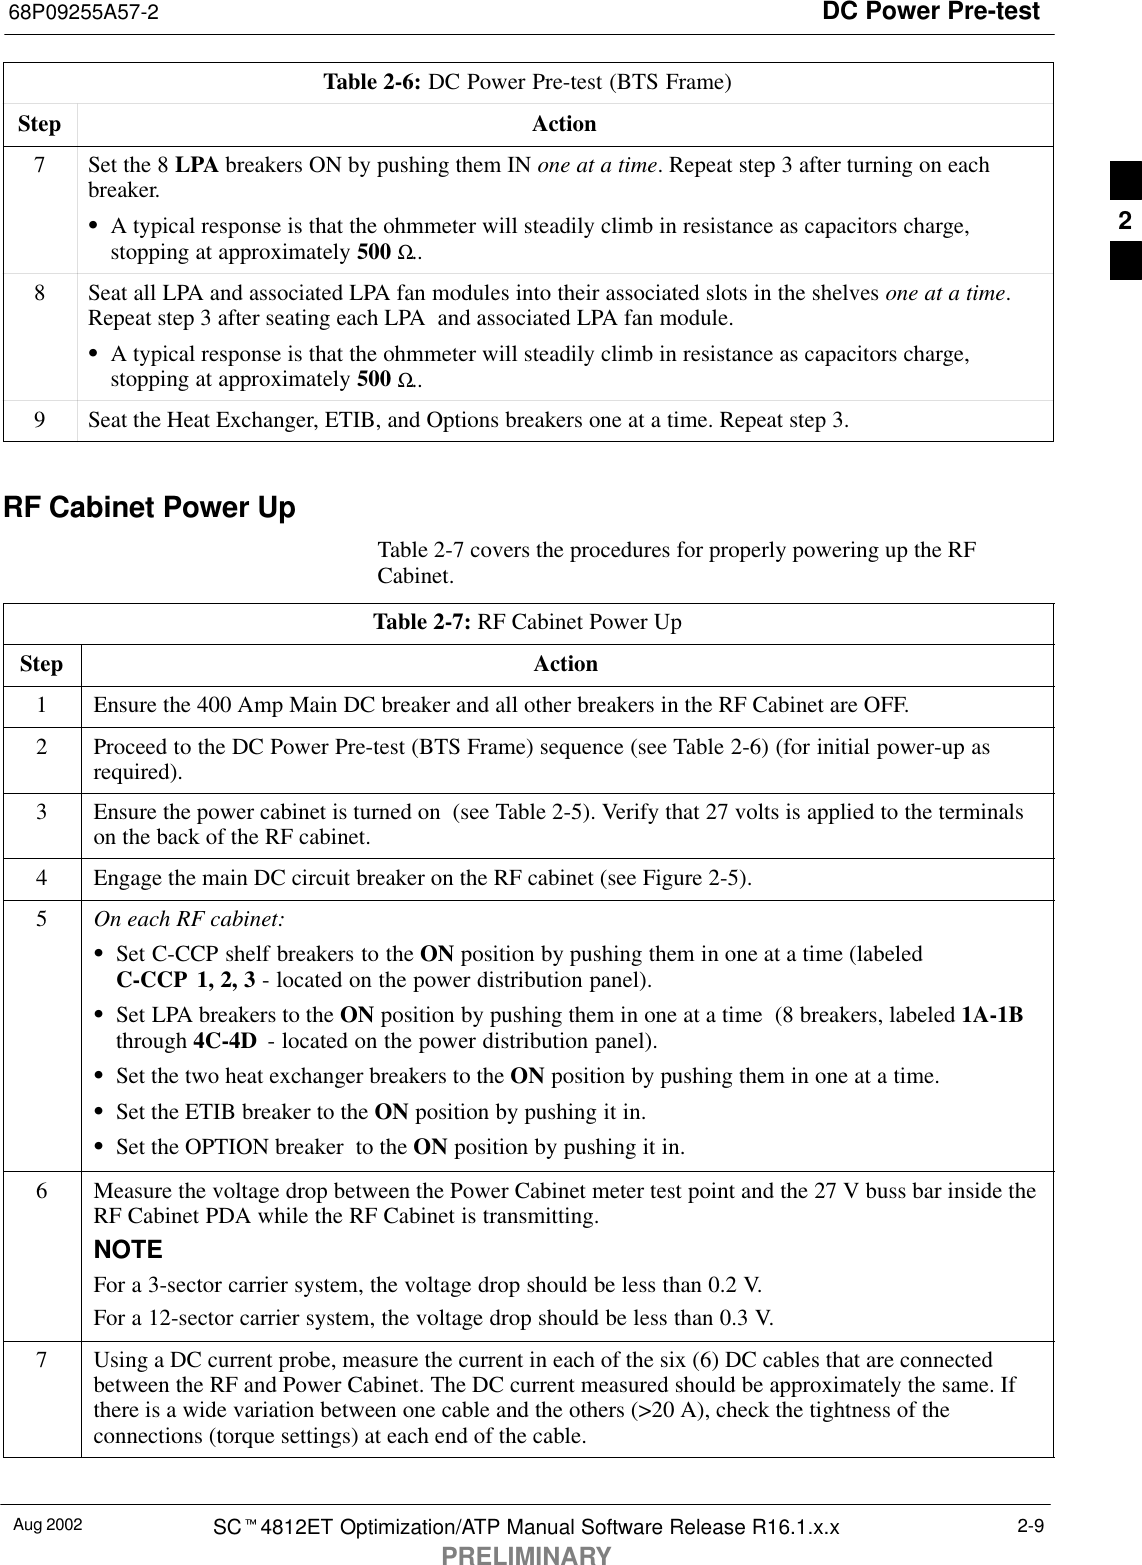 DC Power Pre-test68P09255A57-2Aug 2002 SCt4812ET Optimization/ATP Manual Software Release R16.1.x.xPRELIMINARY2-9Table 2-6: DC Power Pre-test (BTS Frame)Step Action7Set the 8 LPA breakers ON by pushing them IN one at a time. Repeat step 3 after turning on eachbreaker.SA typical response is that the ohmmeter will steadily climb in resistance as capacitors charge,stopping at approximately 500 Ω..8Seat all LPA and associated LPA fan modules into their associated slots in the shelves one at a time.Repeat step 3 after seating each LPA  and associated LPA fan module.SA typical response is that the ohmmeter will steadily climb in resistance as capacitors charge,stopping at approximately 500 Ω..9Seat the Heat Exchanger, ETIB, and Options breakers one at a time. Repeat step 3. RF Cabinet Power UpTable 2-7 covers the procedures for properly powering up the RFCabinet.Table 2-7: RF Cabinet Power UpStep Action1Ensure the 400 Amp Main DC breaker and all other breakers in the RF Cabinet are OFF.2Proceed to the DC Power Pre-test (BTS Frame) sequence (see Table 2-6) (for initial power-up asrequired).3Ensure the power cabinet is turned on  (see Table 2-5). Verify that 27 volts is applied to the terminalson the back of the RF cabinet.4Engage the main DC circuit breaker on the RF cabinet (see Figure 2-5).5On each RF cabinet:SSet C-CCP shelf breakers to the ON position by pushing them in one at a time (labeledC-CCP 1, 2, 3 - located on the power distribution panel).SSet LPA breakers to the ON position by pushing them in one at a time  (8 breakers, labeled 1A-1Bthrough 4C-4D  - located on the power distribution panel).SSet the two heat exchanger breakers to the ON position by pushing them in one at a time.SSet the ETIB breaker to the ON position by pushing it in.SSet the OPTION breaker  to the ON position by pushing it in.6Measure the voltage drop between the Power Cabinet meter test point and the 27 V buss bar inside theRF Cabinet PDA while the RF Cabinet is transmitting.NOTEFor a 3-sector carrier system, the voltage drop should be less than 0.2 V.For a 12-sector carrier system, the voltage drop should be less than 0.3 V.7Using a DC current probe, measure the current in each of the six (6) DC cables that are connectedbetween the RF and Power Cabinet. The DC current measured should be approximately the same. Ifthere is a wide variation between one cable and the others (&gt;20 A), check the tightness of theconnections (torque settings) at each end of the cable. 2